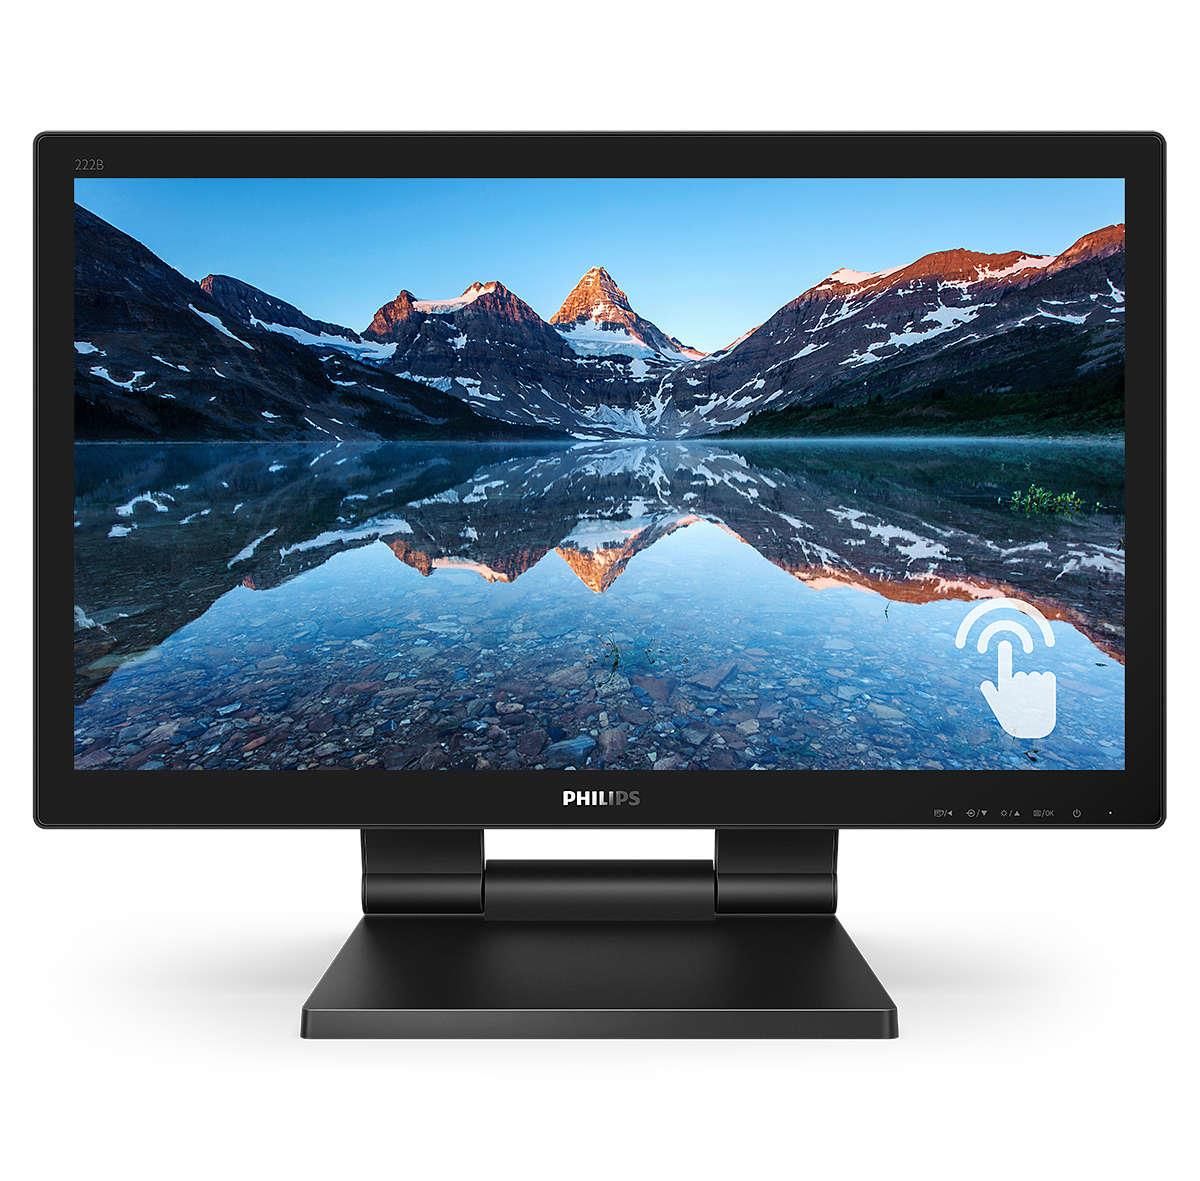 PHILIPS Monitor SmoothTouch 21.5